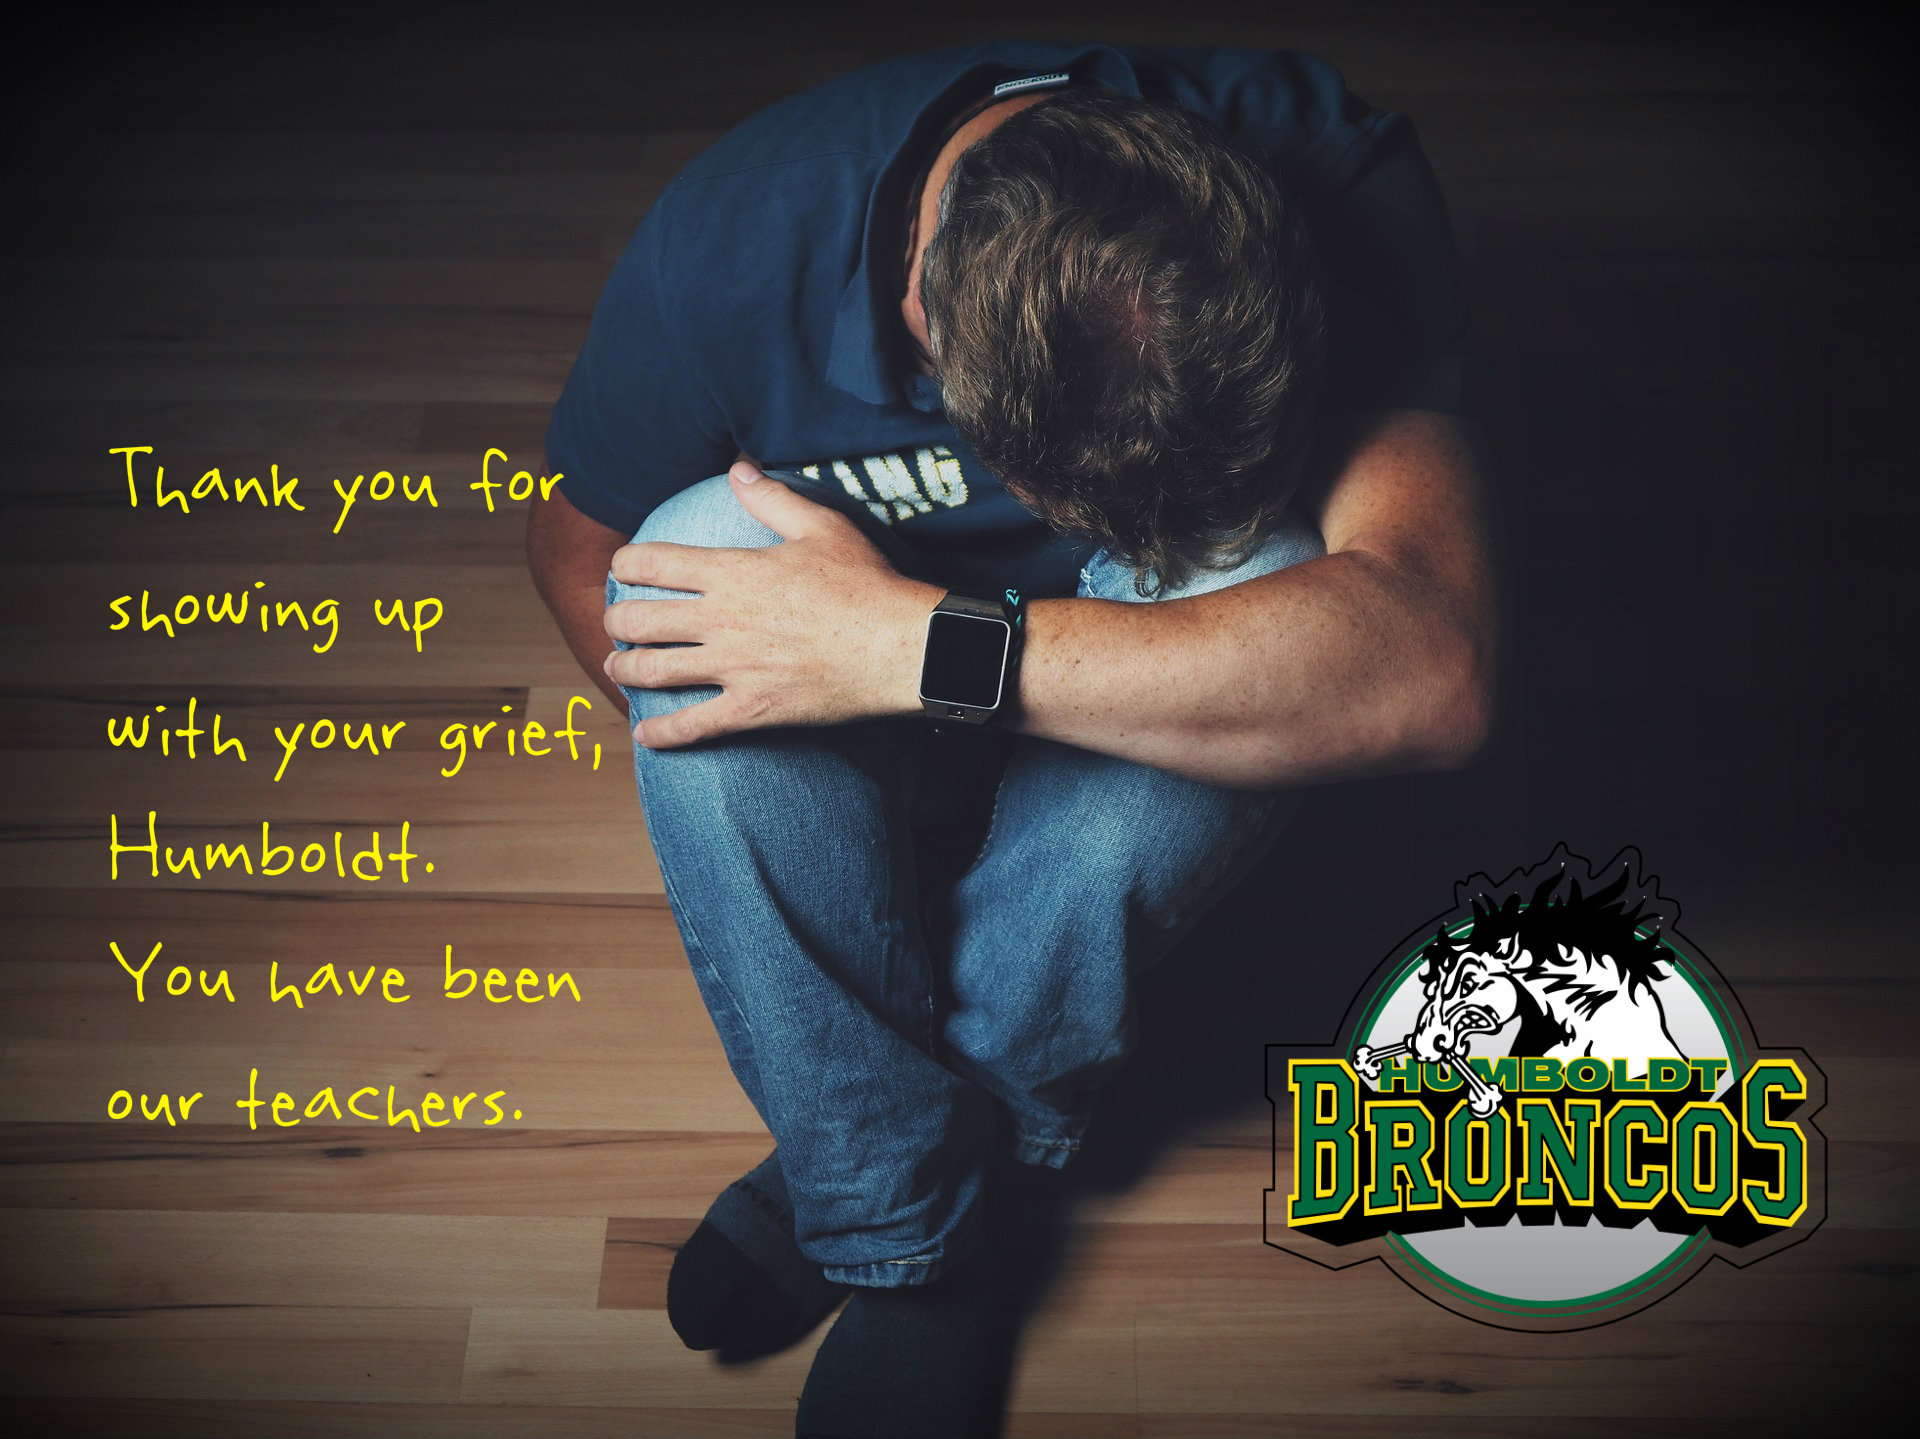 Thank you to Humboldt. For showing up in your grief. You taught us much. ON poster of man curled up in grief with Broncos logo in the bottom corner